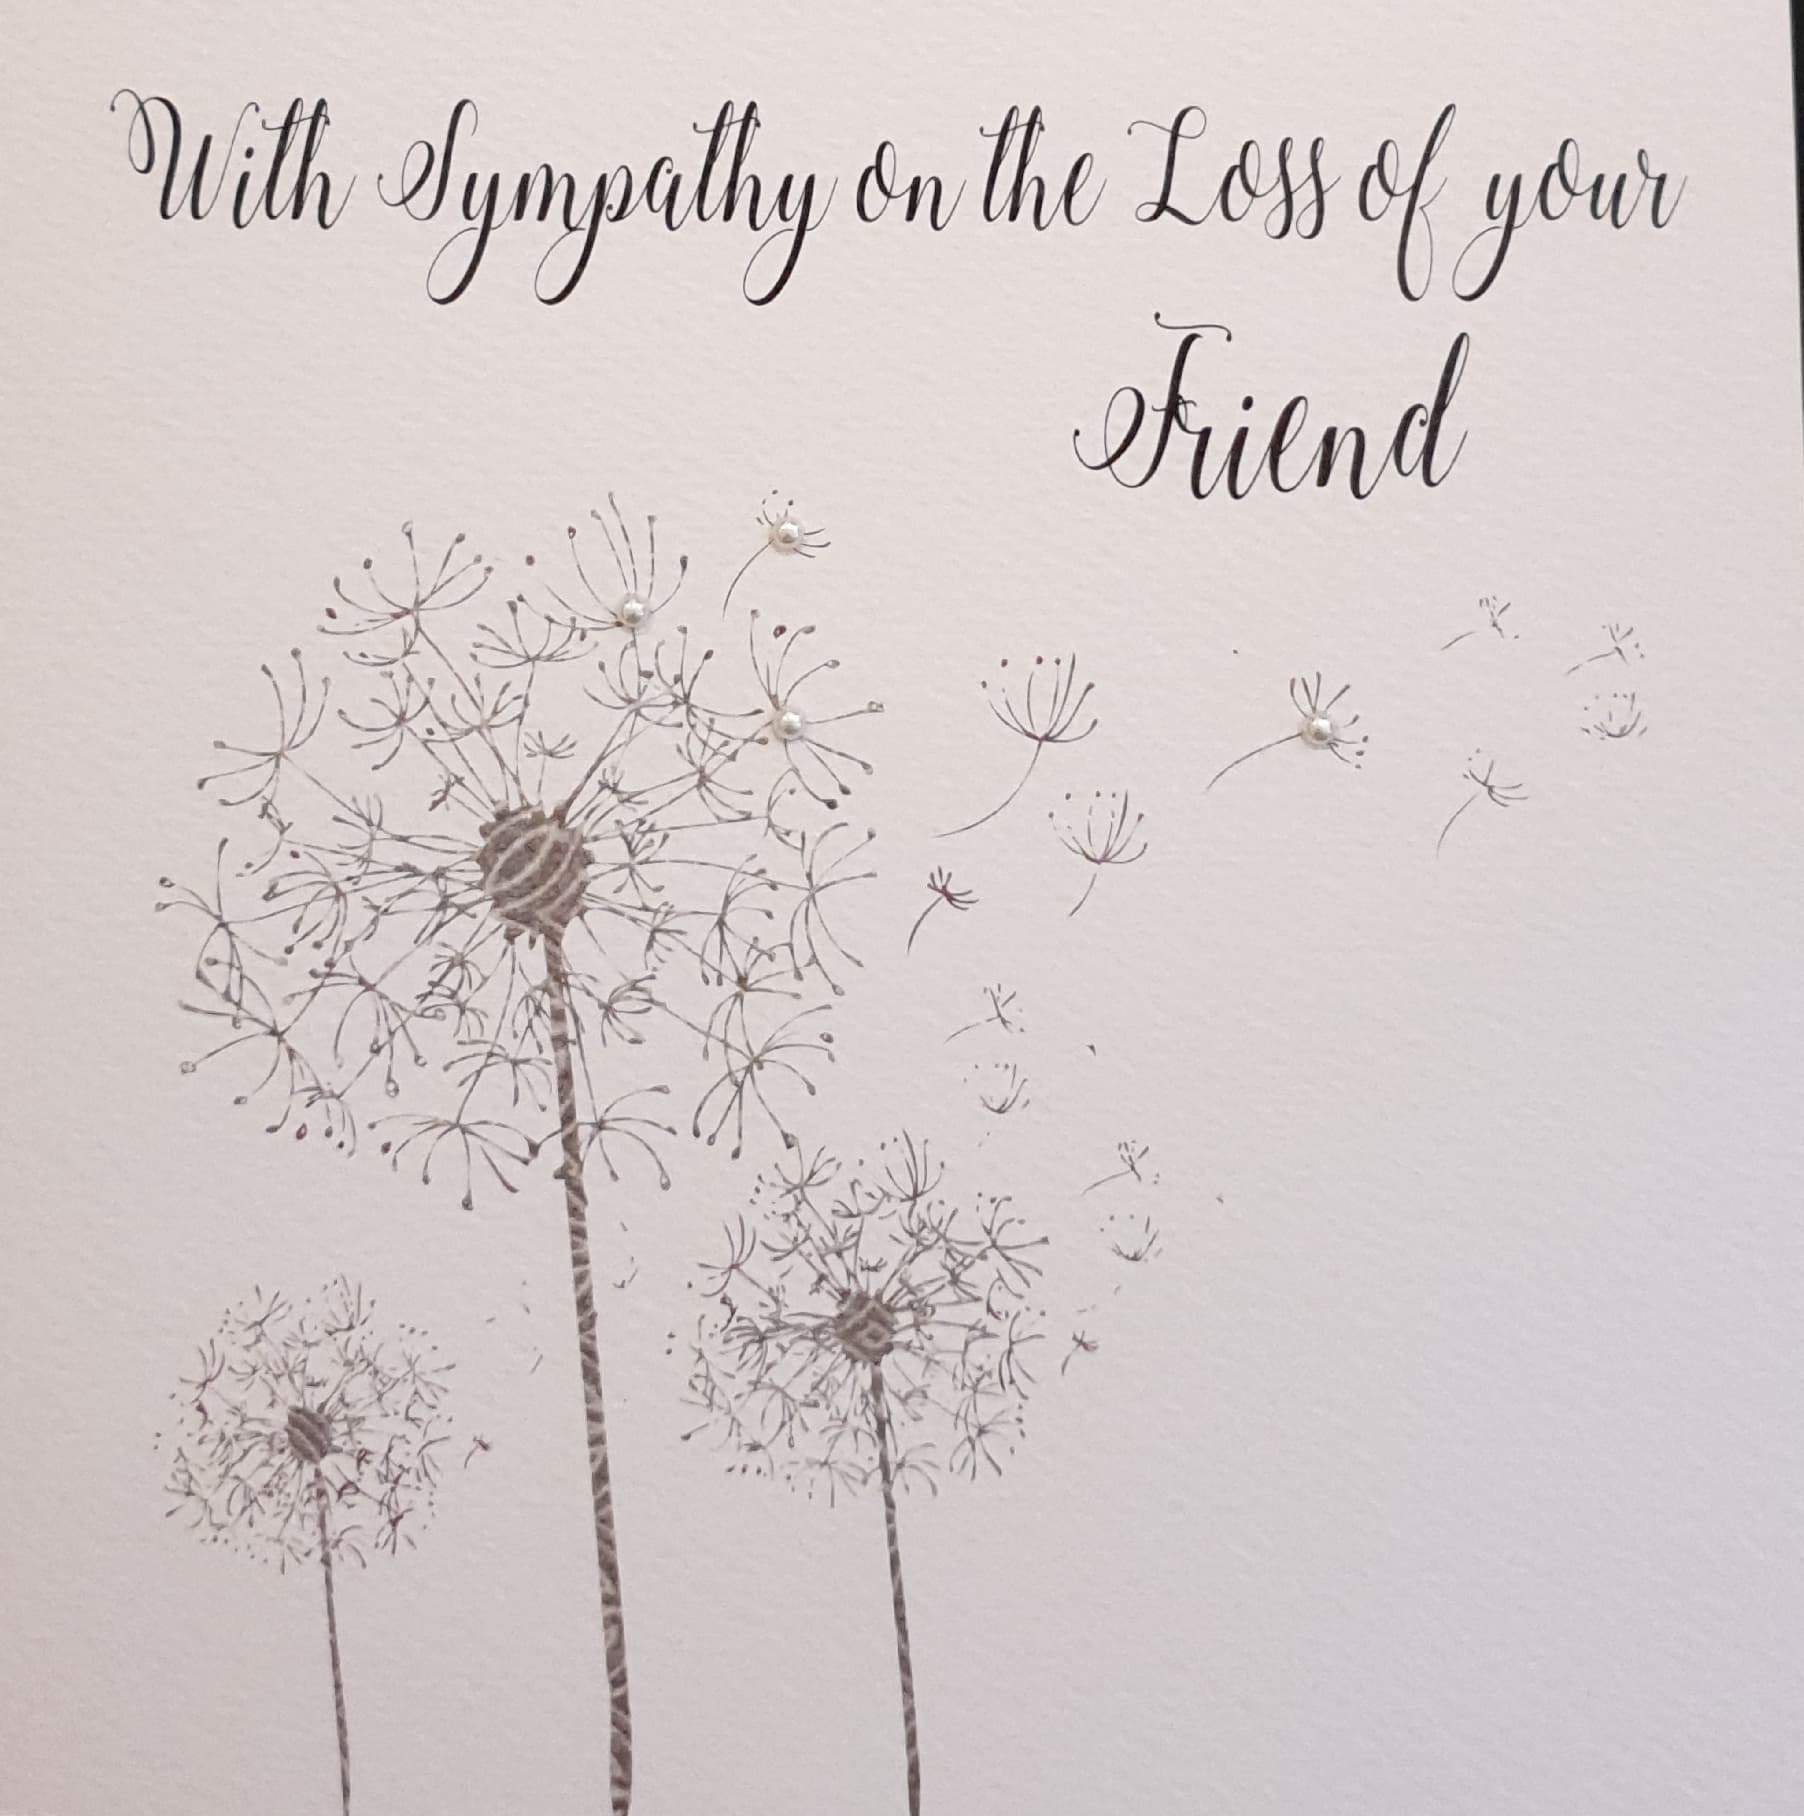 Sympathy Card - The Loss of Your Friend / Three Dandelions Blown in the Wind